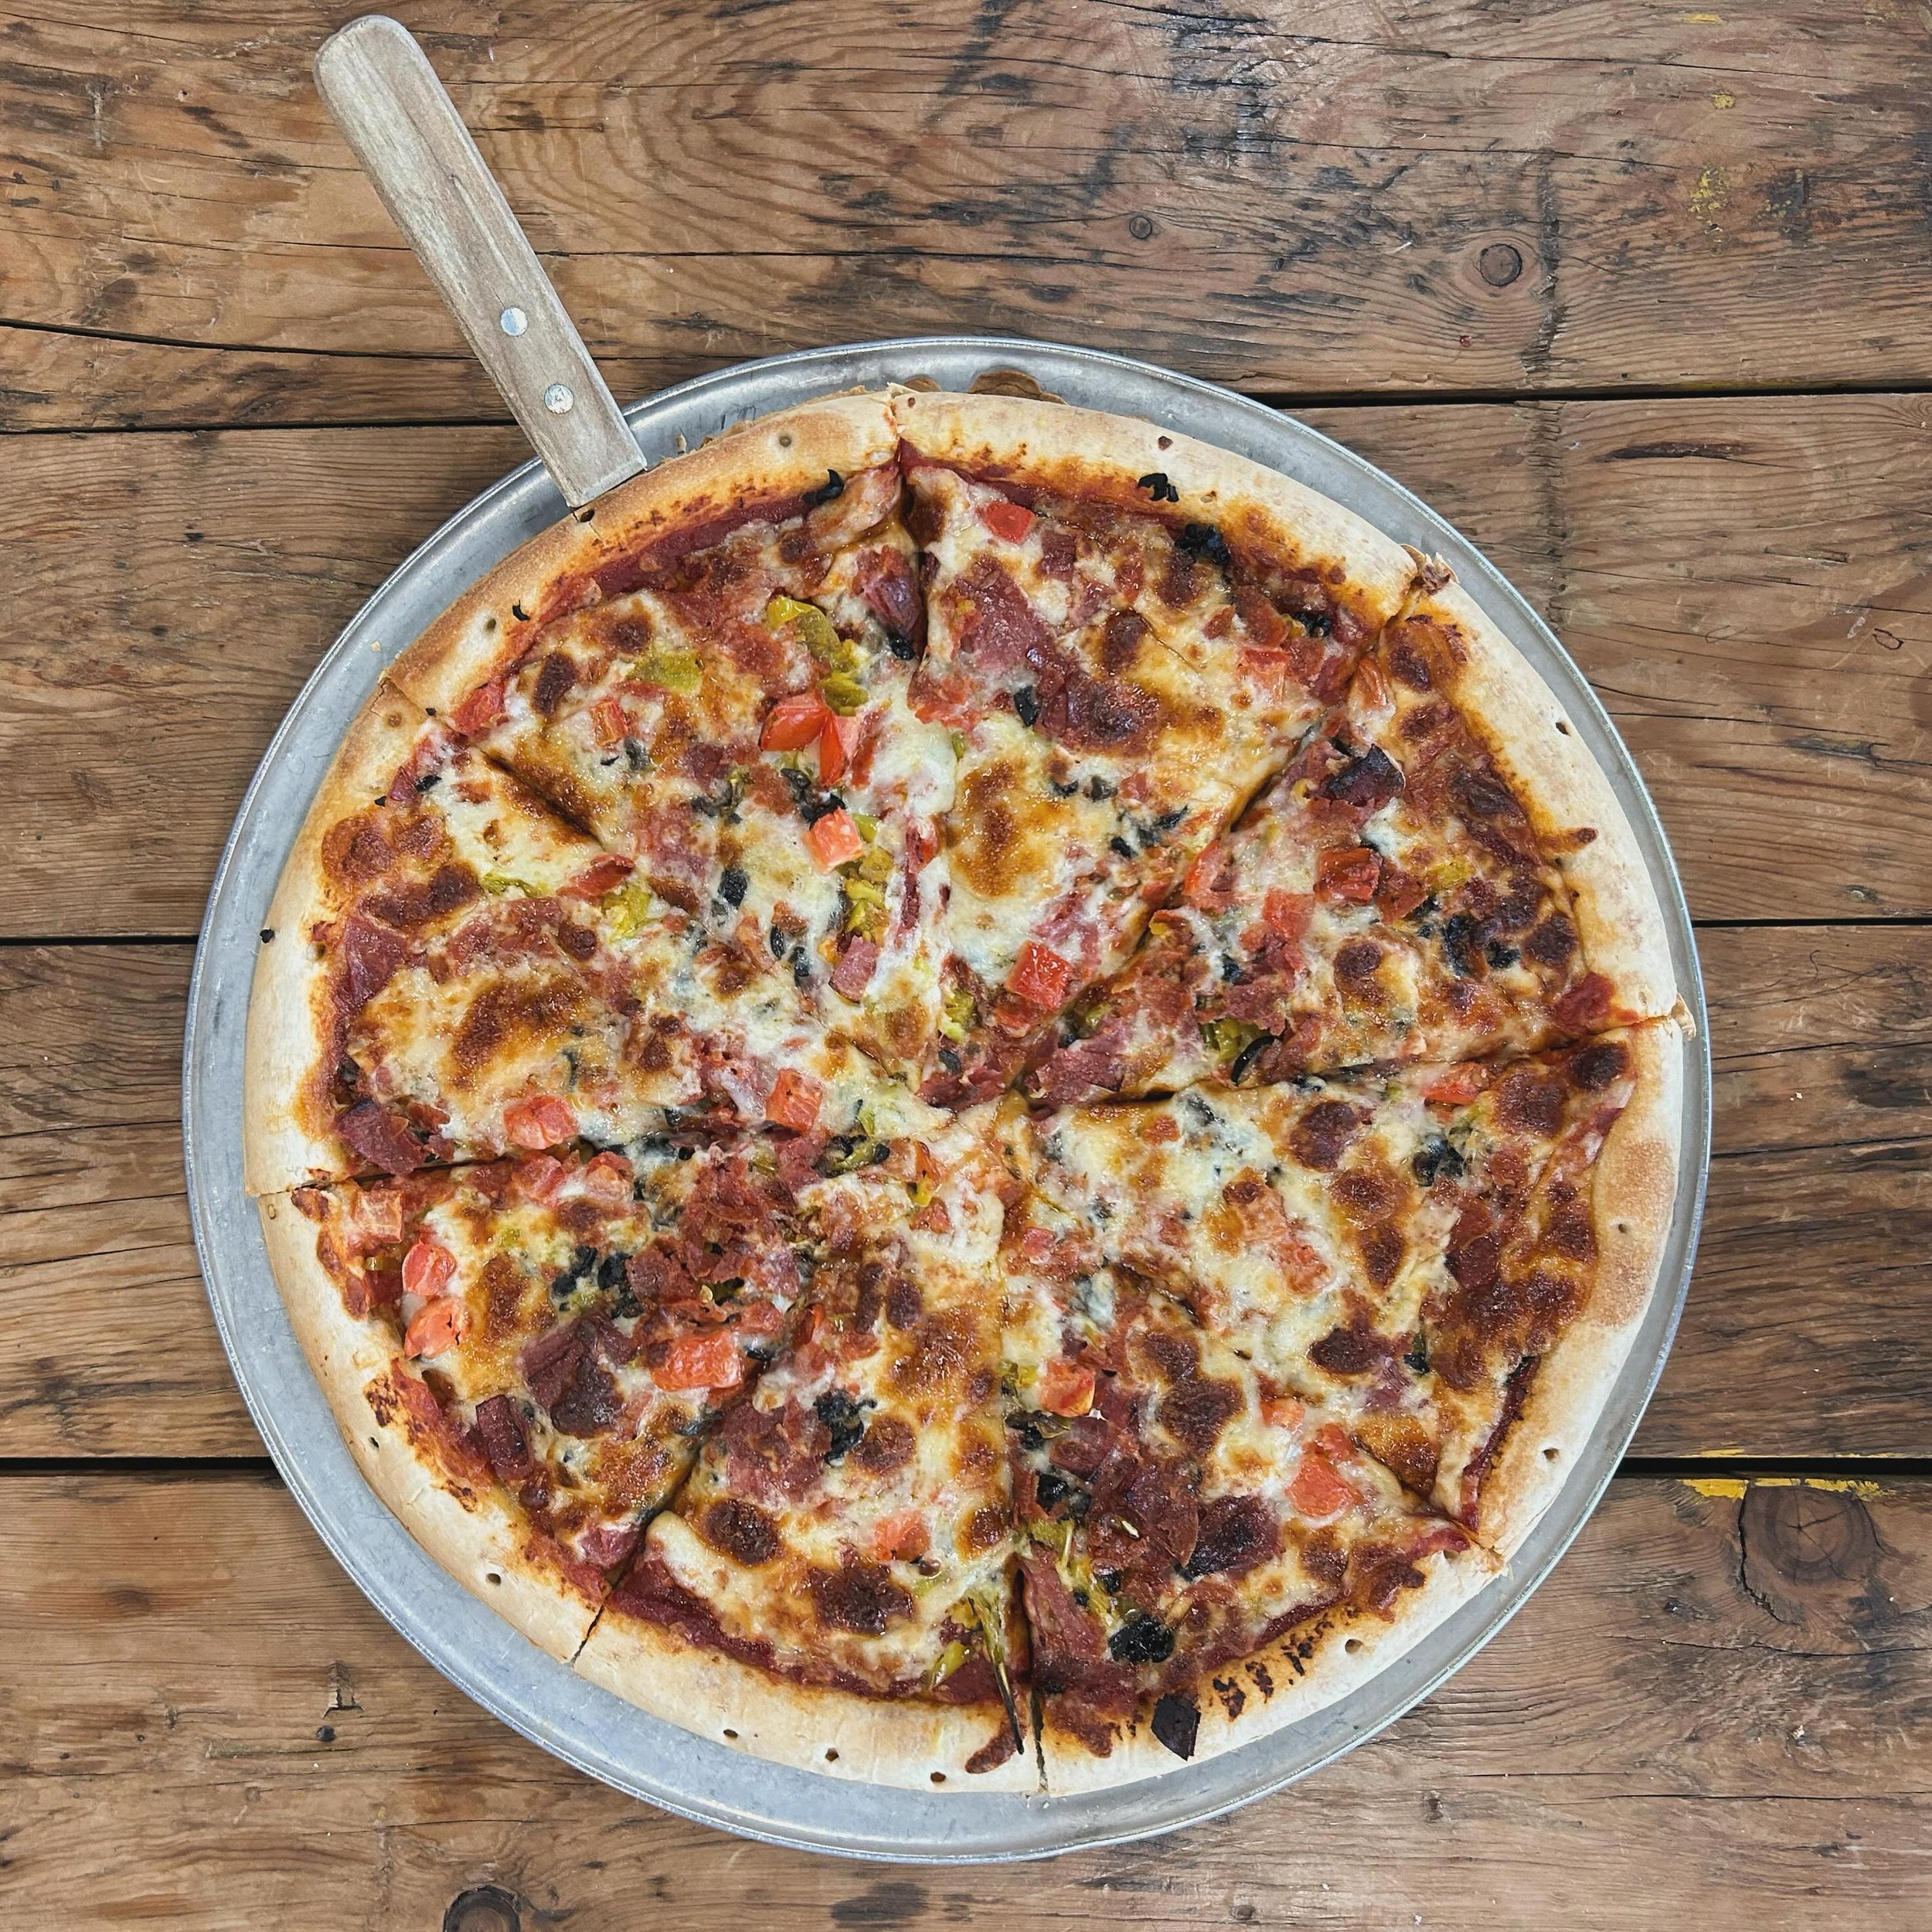 Happy Pizza Thursday AND Drink for a Cause!  Today&rsquo;s Specialty Pizza is inspired by the chopped Italian sandwich and topped with pizza sauce, mozzarella, provolone, and chopped pepperoni, salami, Roma tomato, pepperoncini, and olives!

25% of a